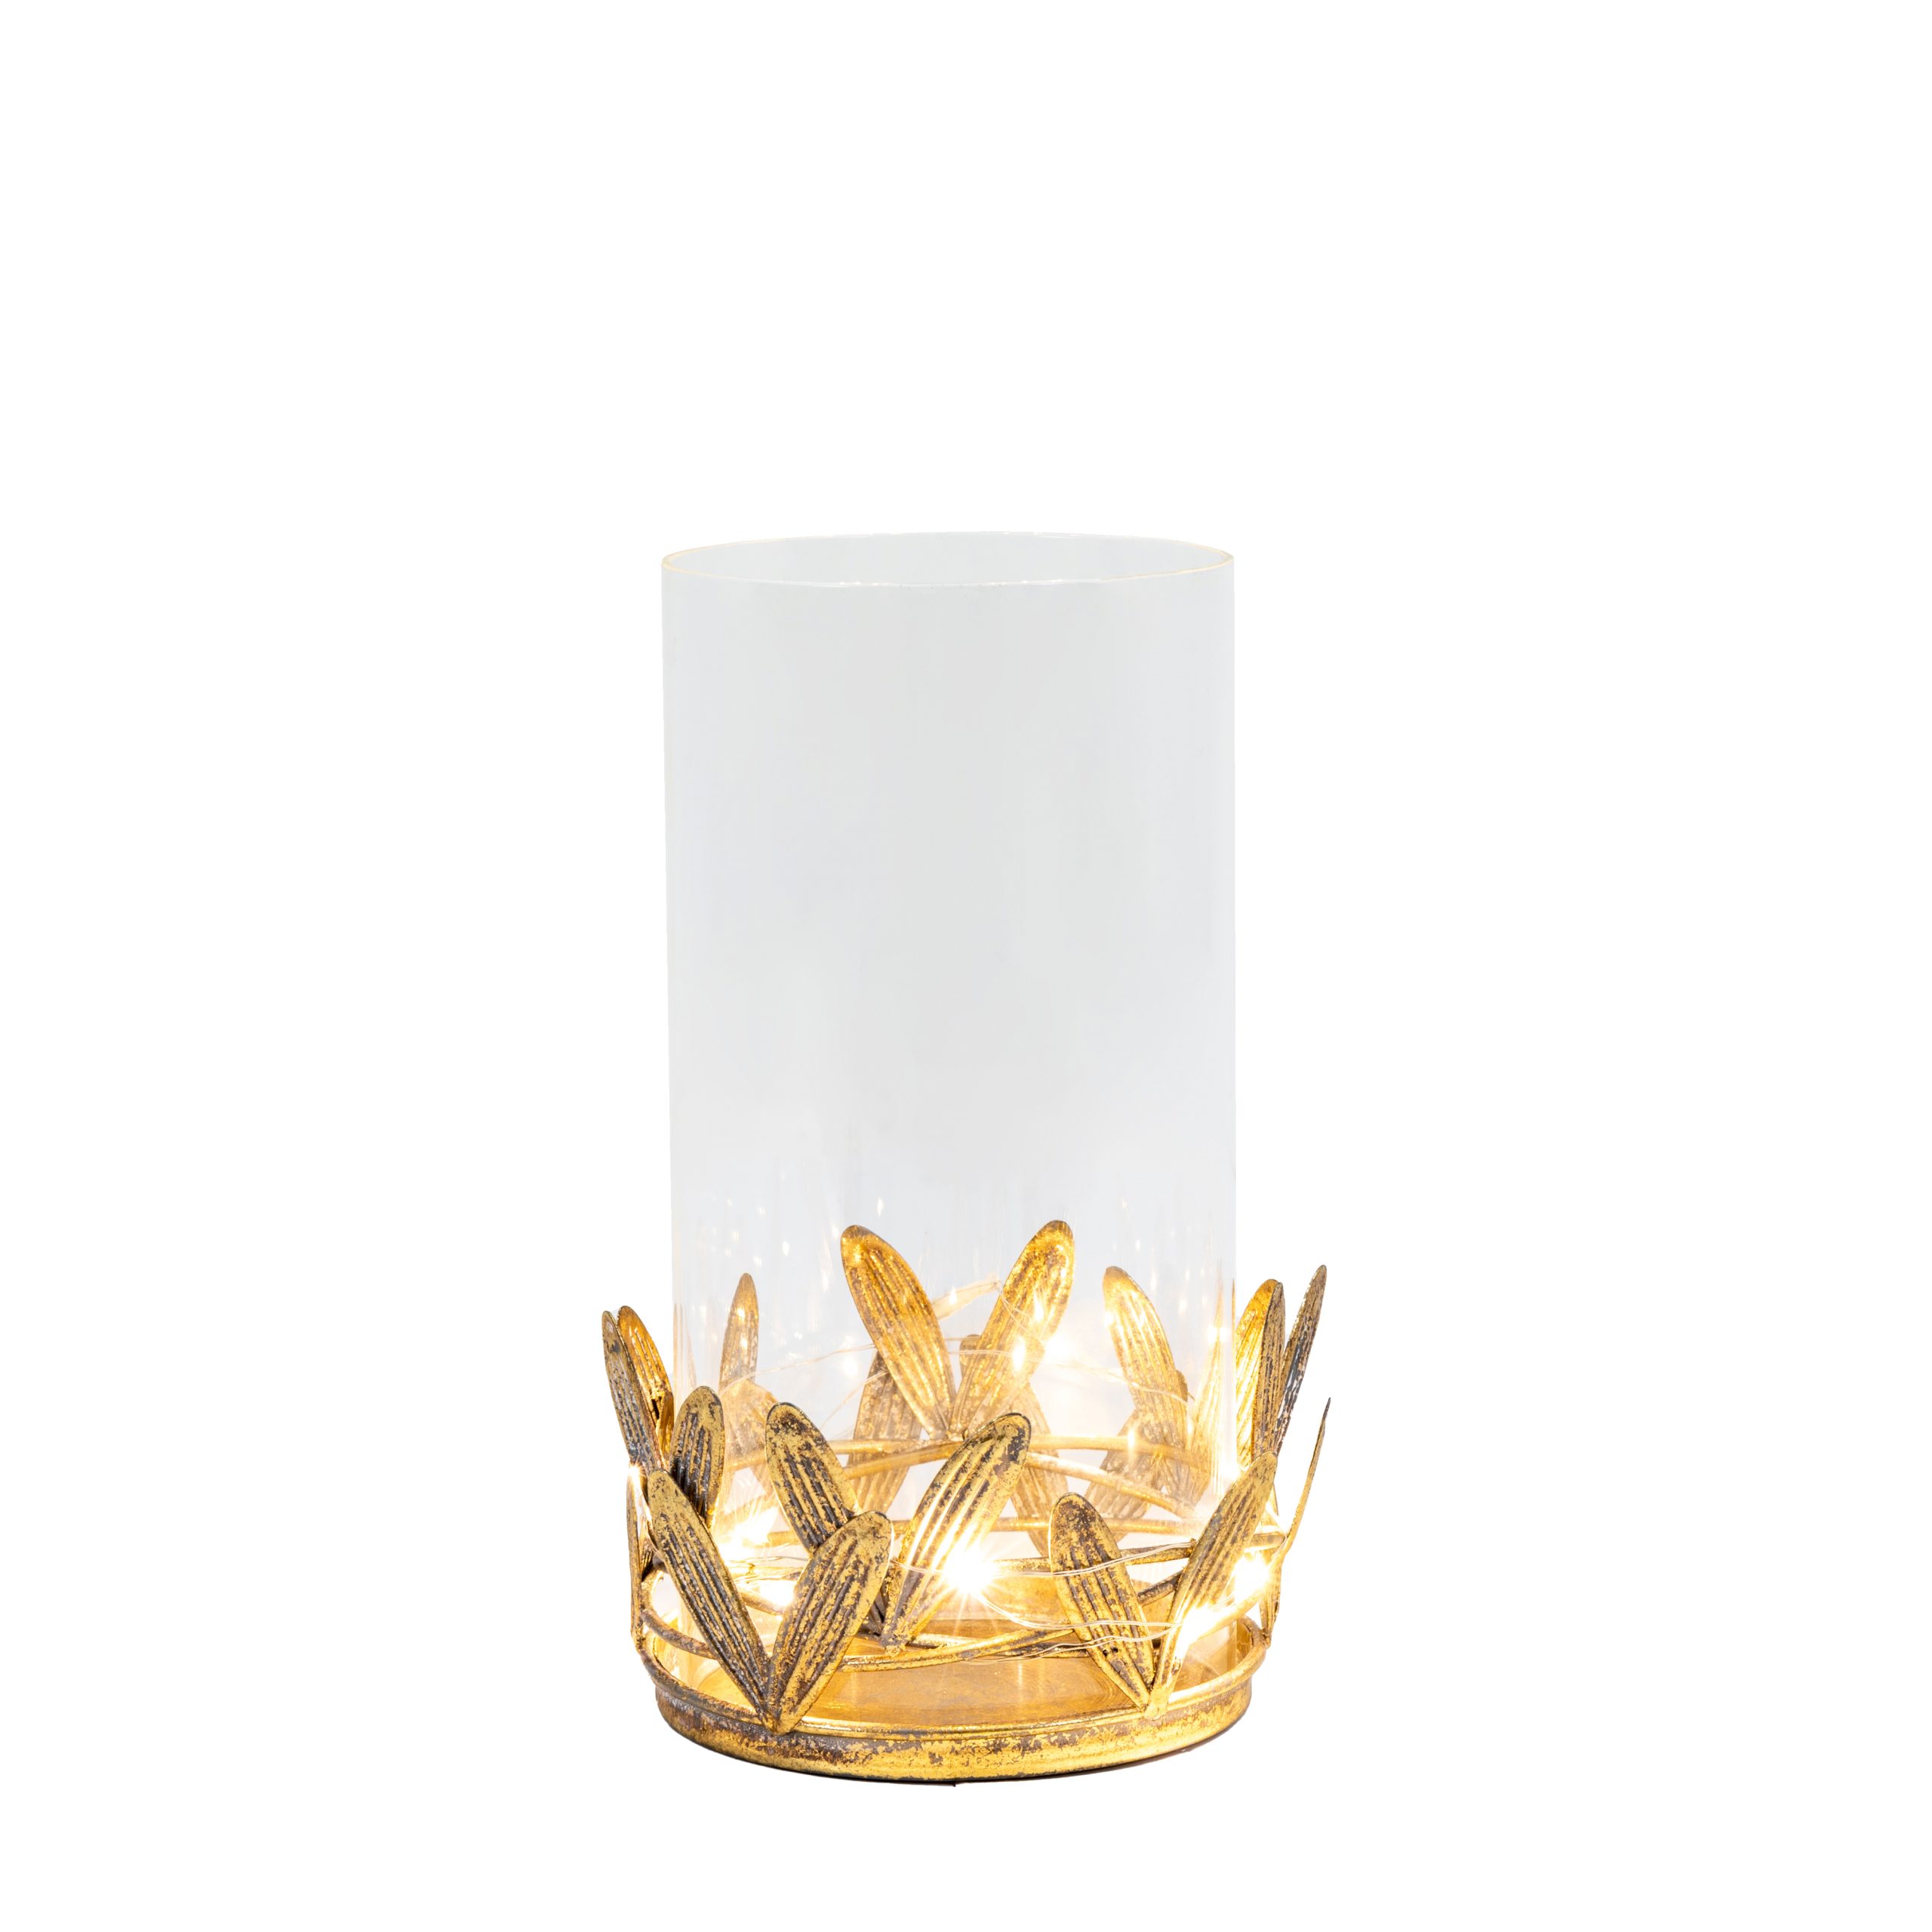 Gallery Direct Mistletoe Candle Holder with LED Gold